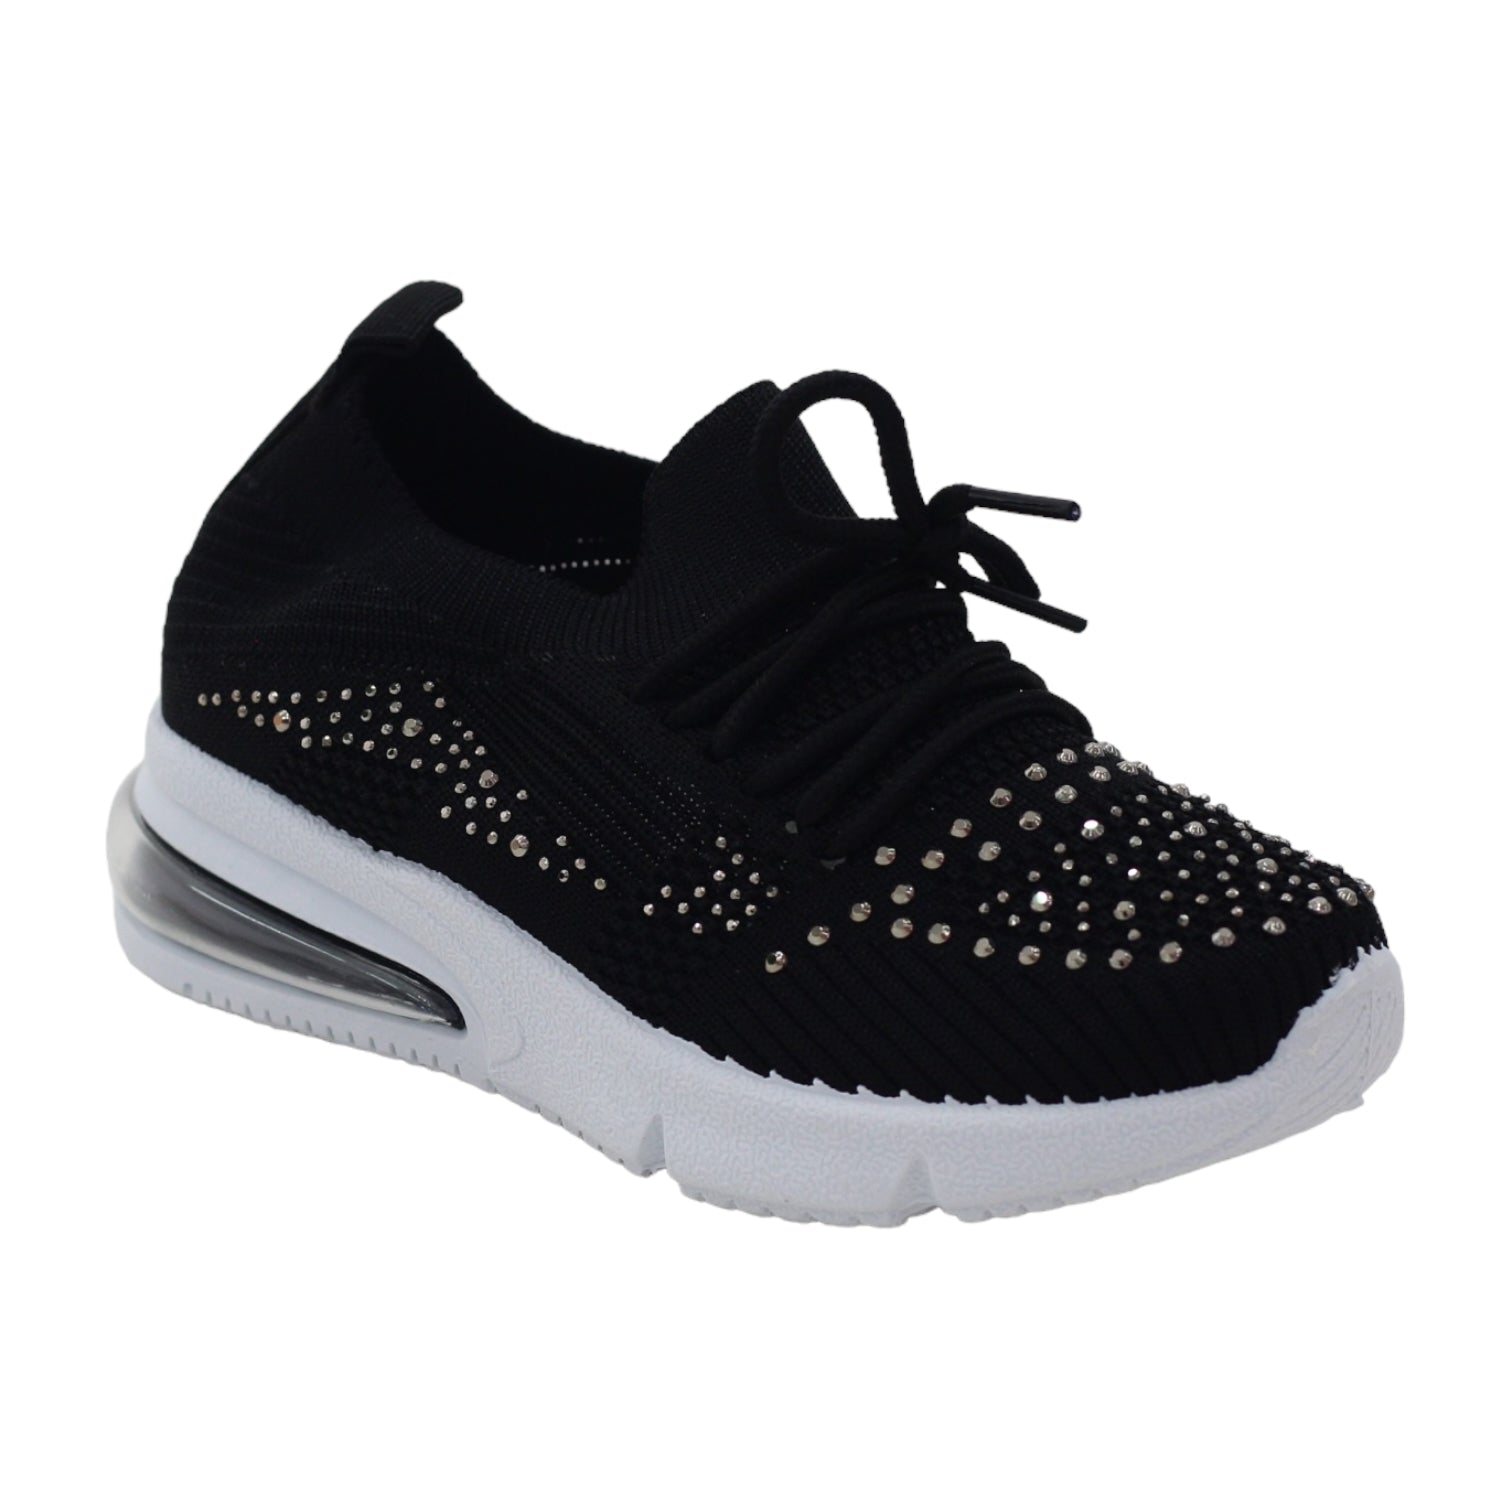 Obioma girls fly knit lace up sneaker with diamonds black